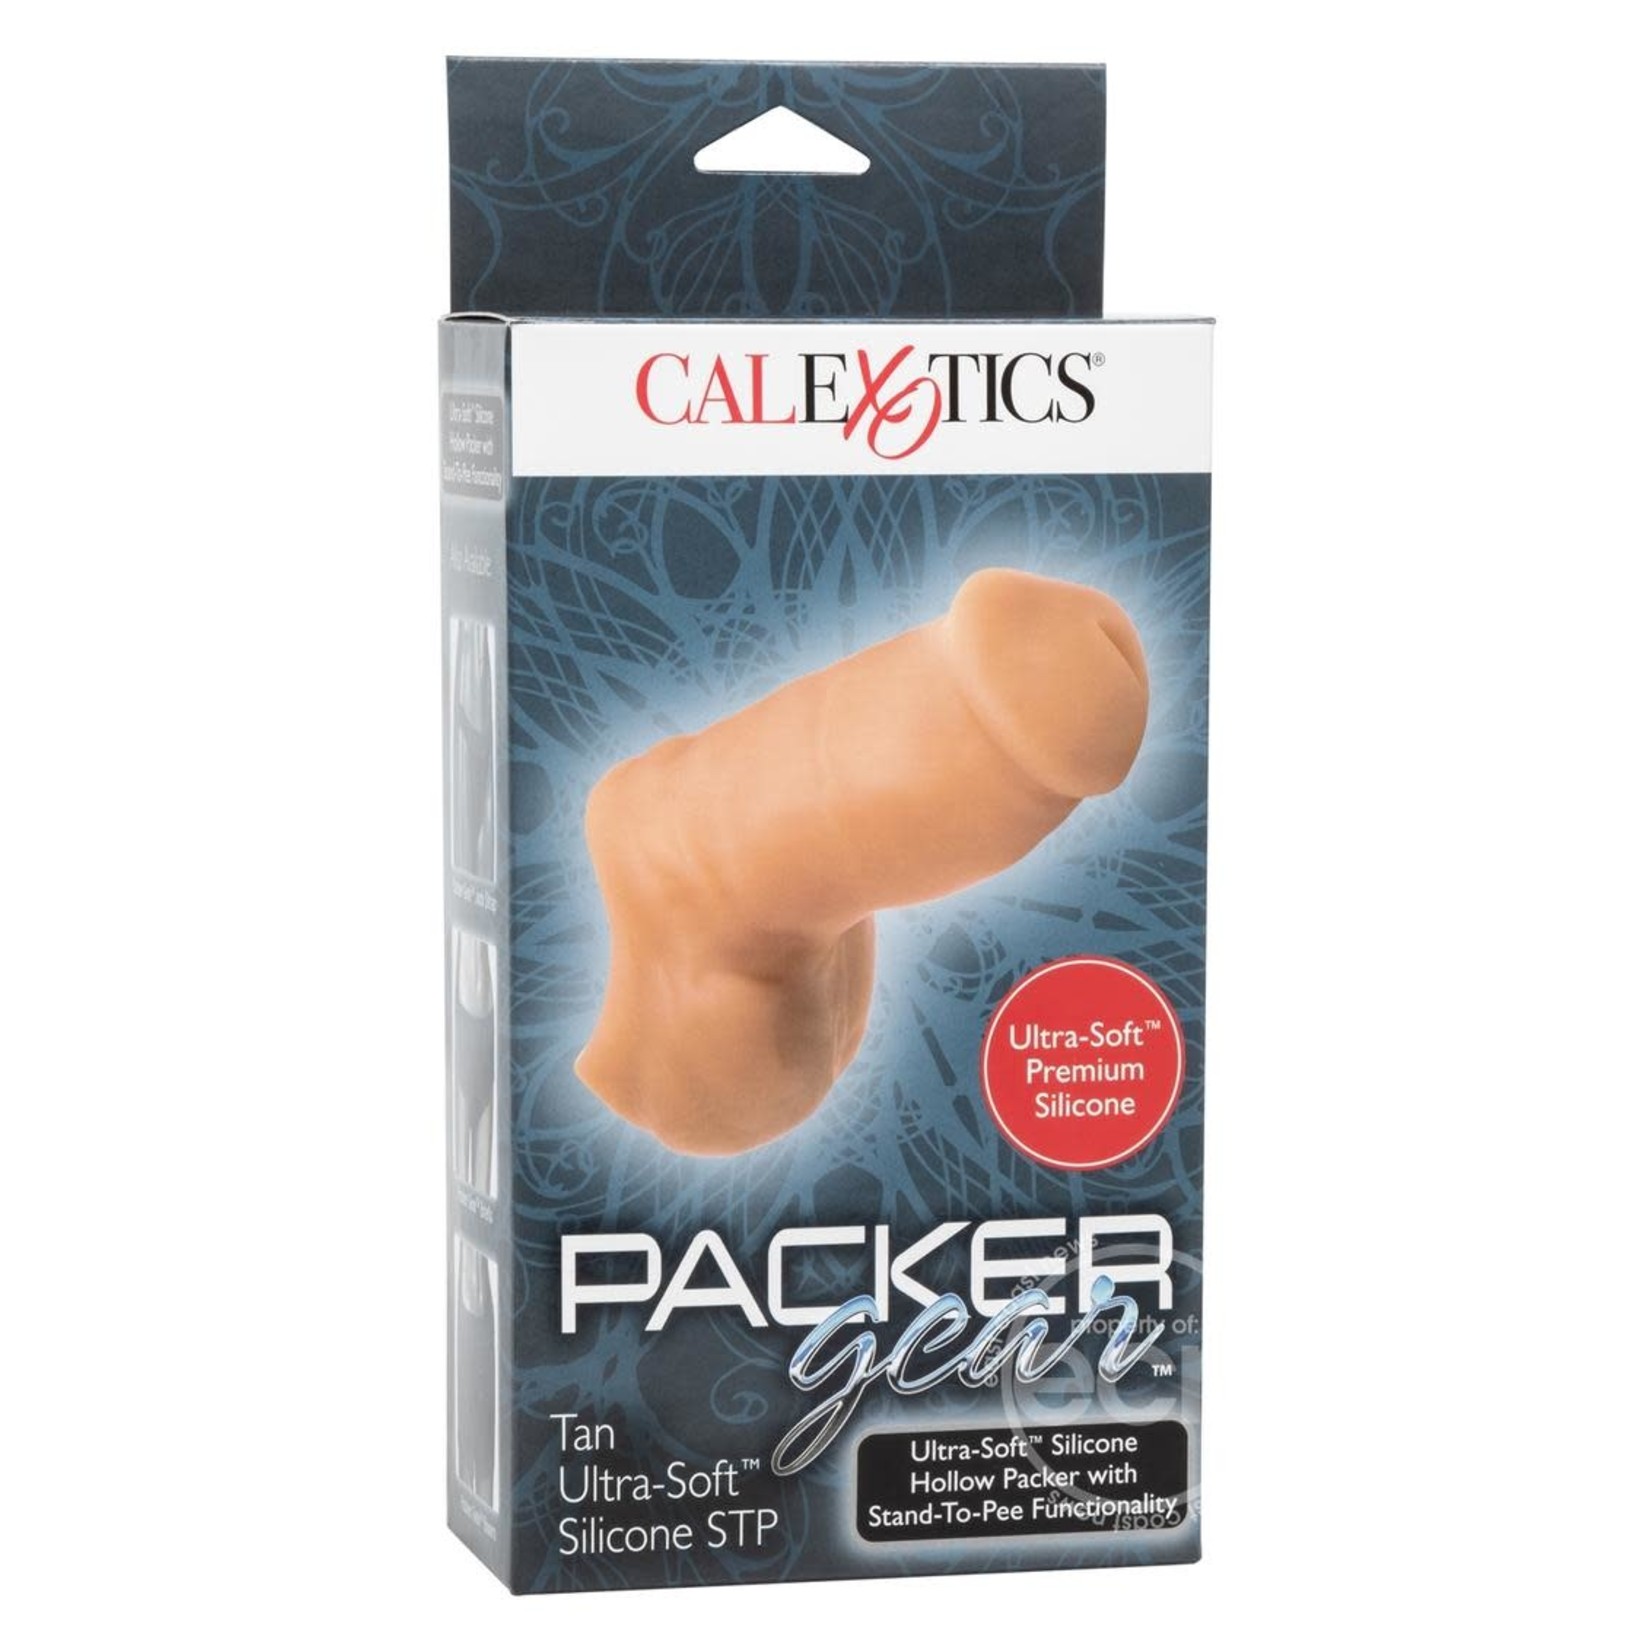 Packer Gear Ultra-Soft Silicone STP-Tan